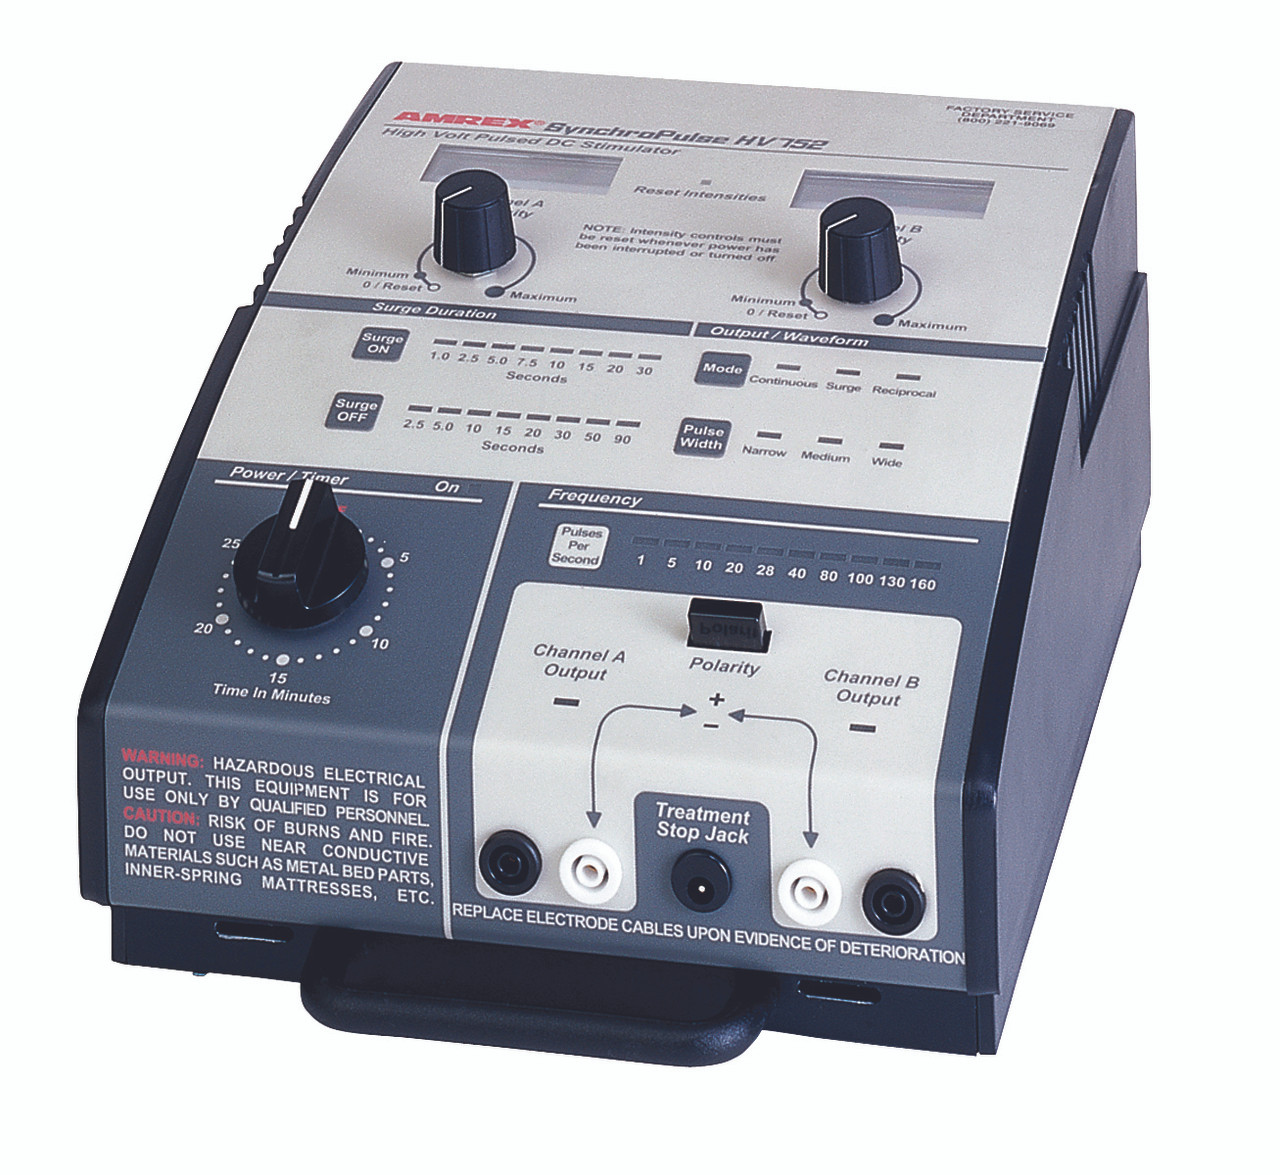 Amrex¨ Ultrasound/Stim Combo - US/752 (High Volt), 1.0 and 3.3 MHz with 5 cm head and QuickConnect Transducer